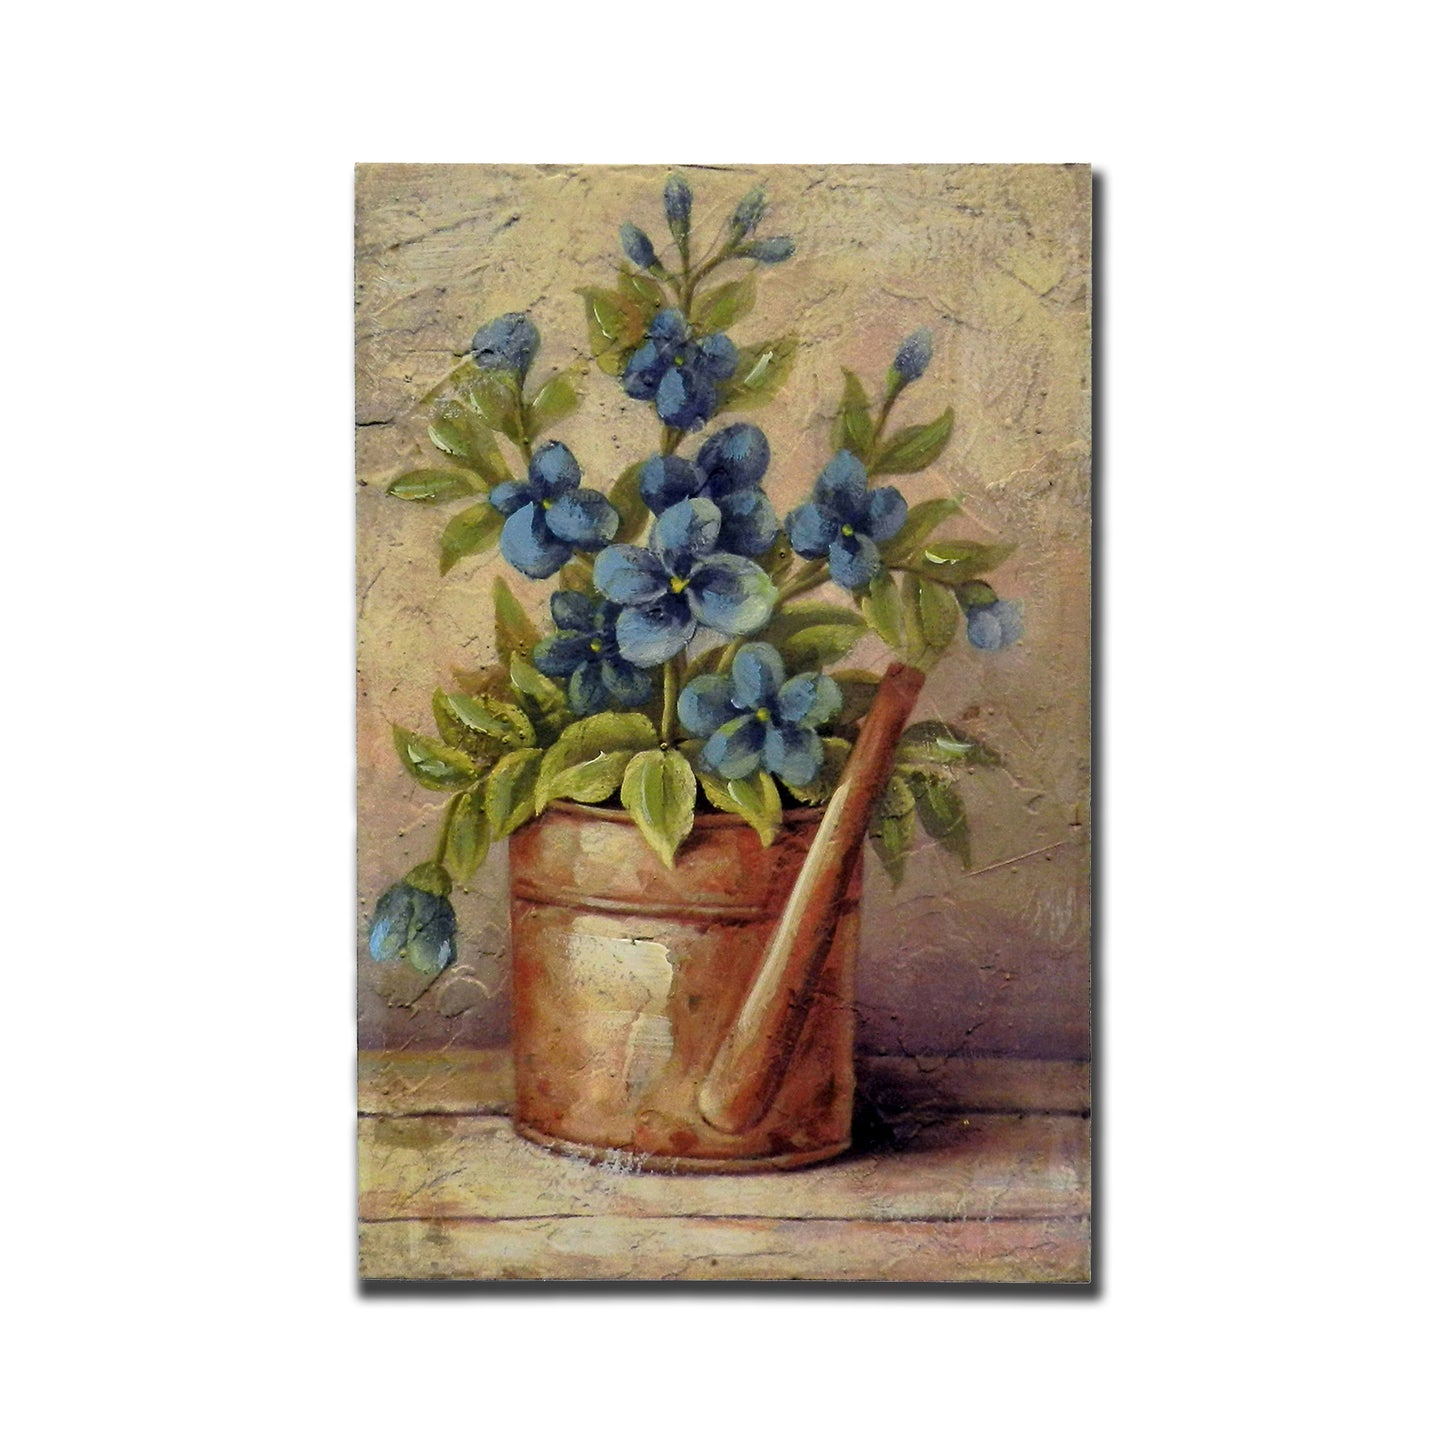 CVHOMEDECO. Primitive Vintage Hand Painted Wooden Frame Wall Hanging 3D Painting Decoration Art, Flower in Pail Design, 8 x 12 Inch